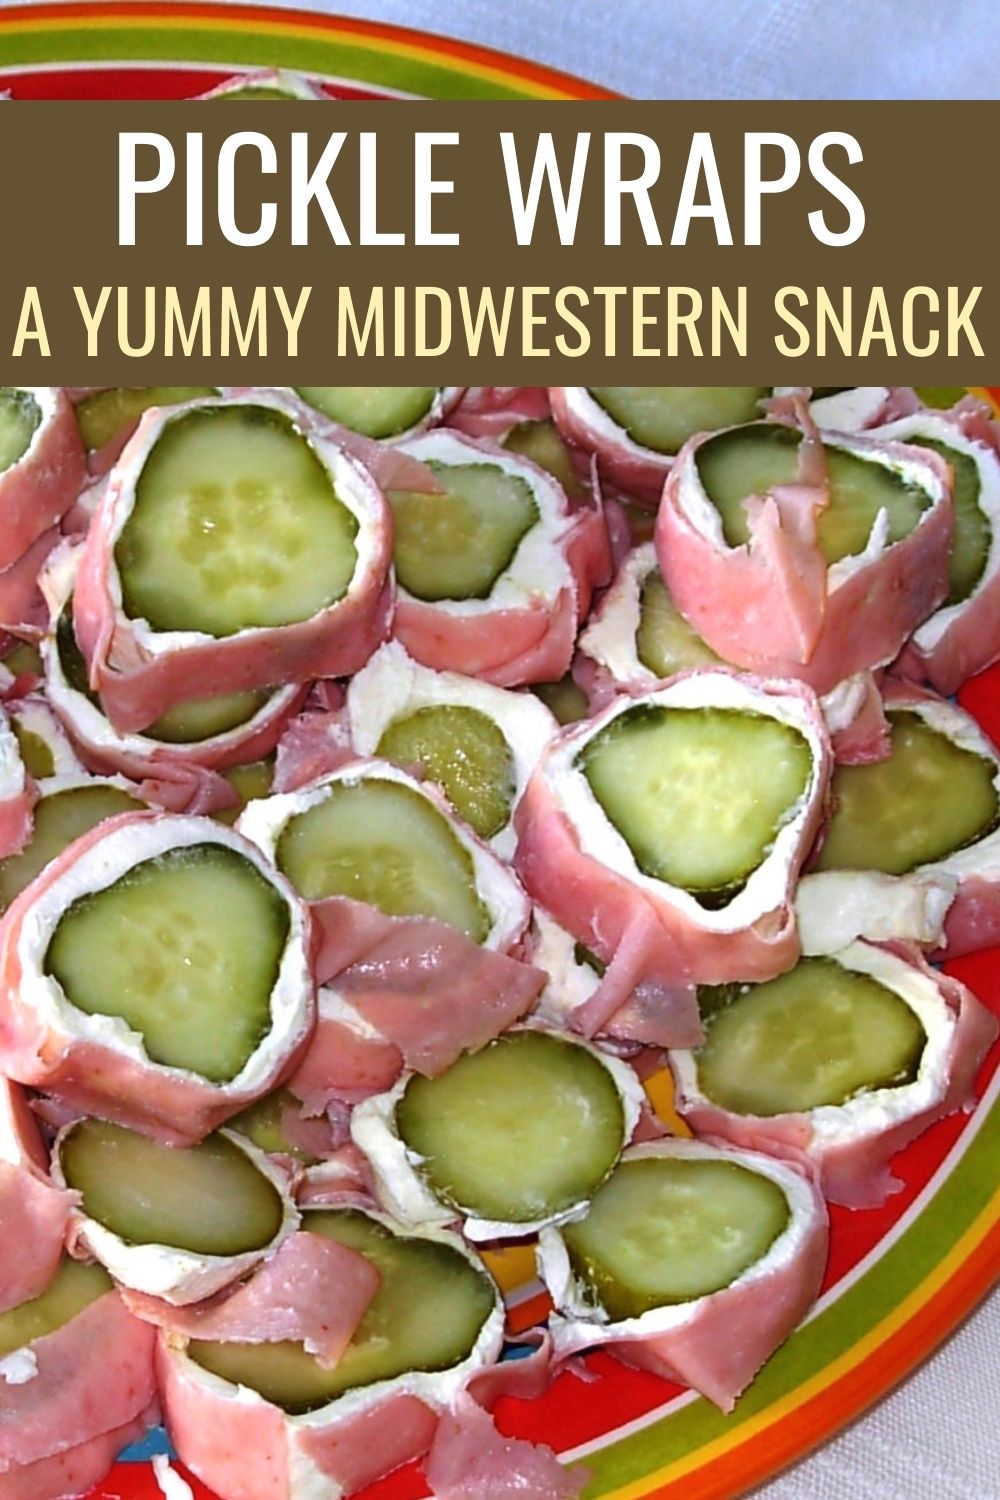 Pickle wraps - a yummy Midwestern snack